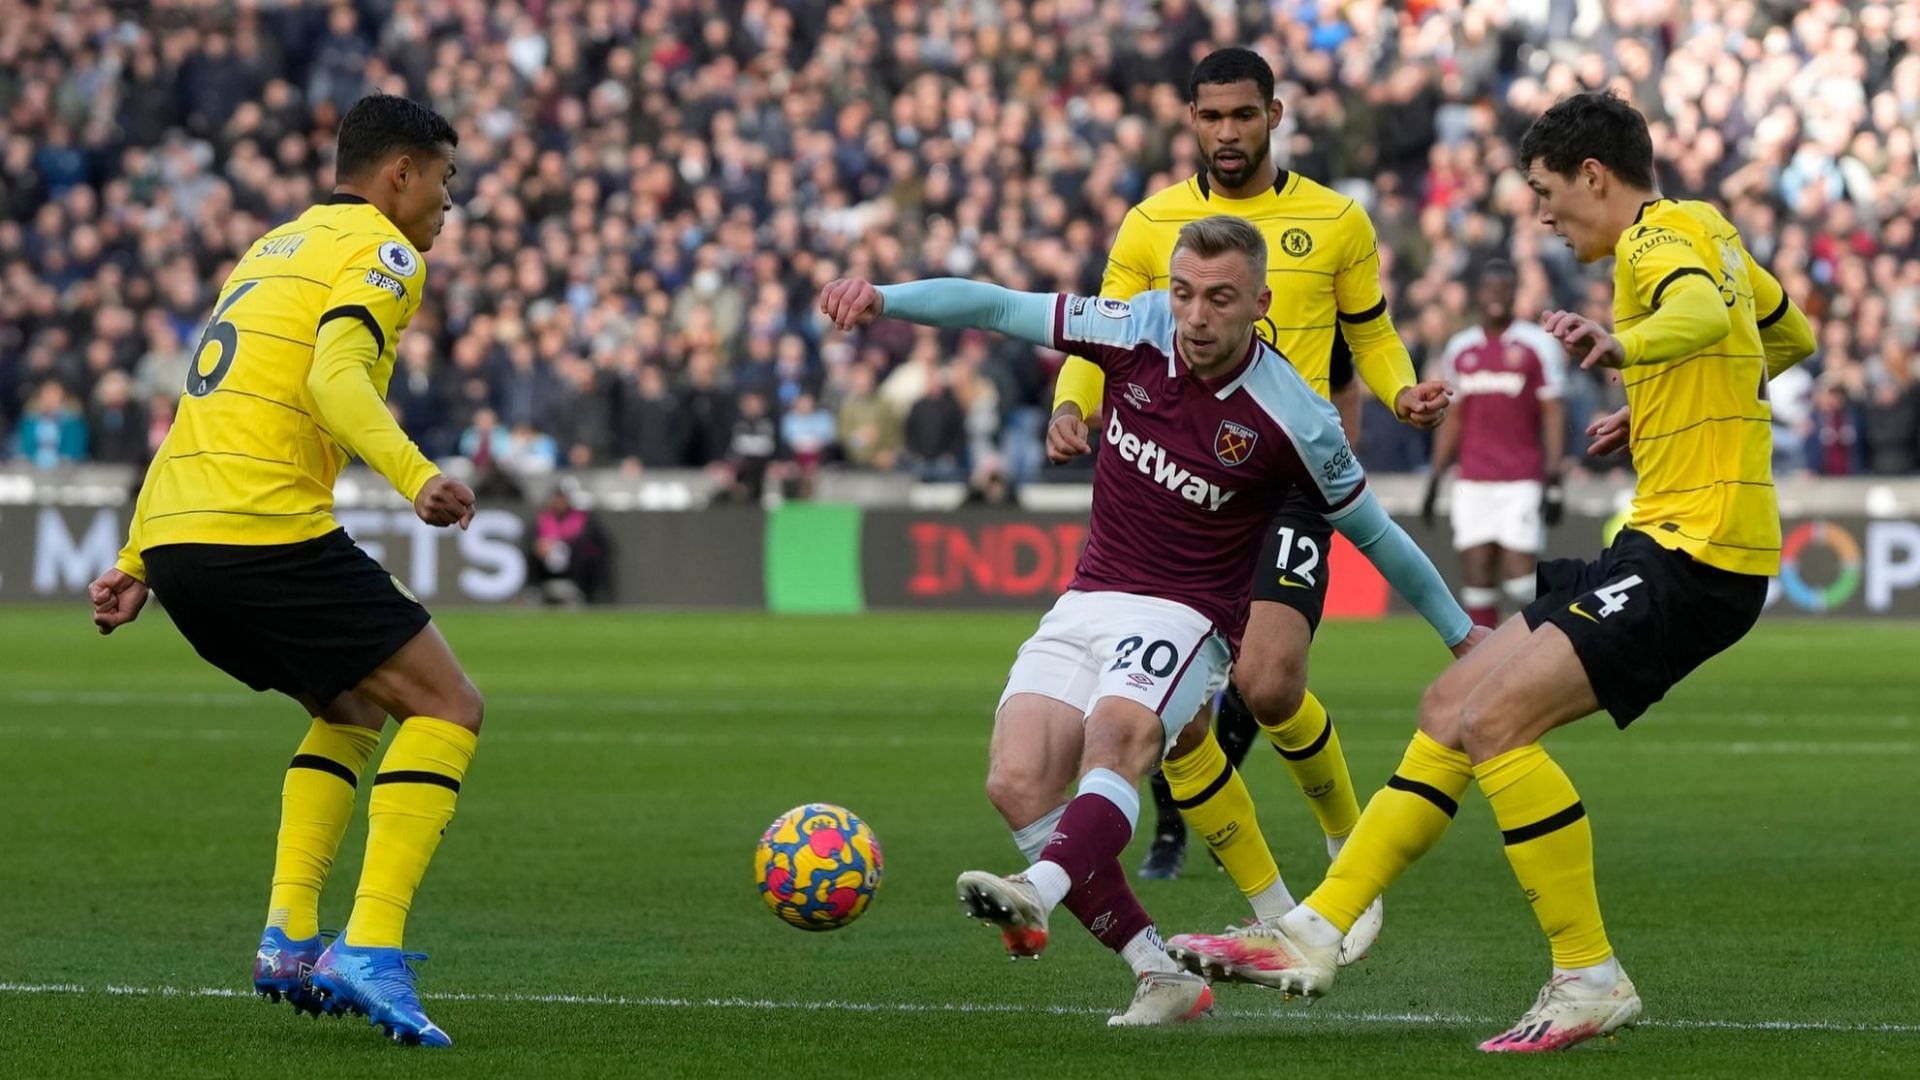 Chelsea suffered a shock loss to West Ham